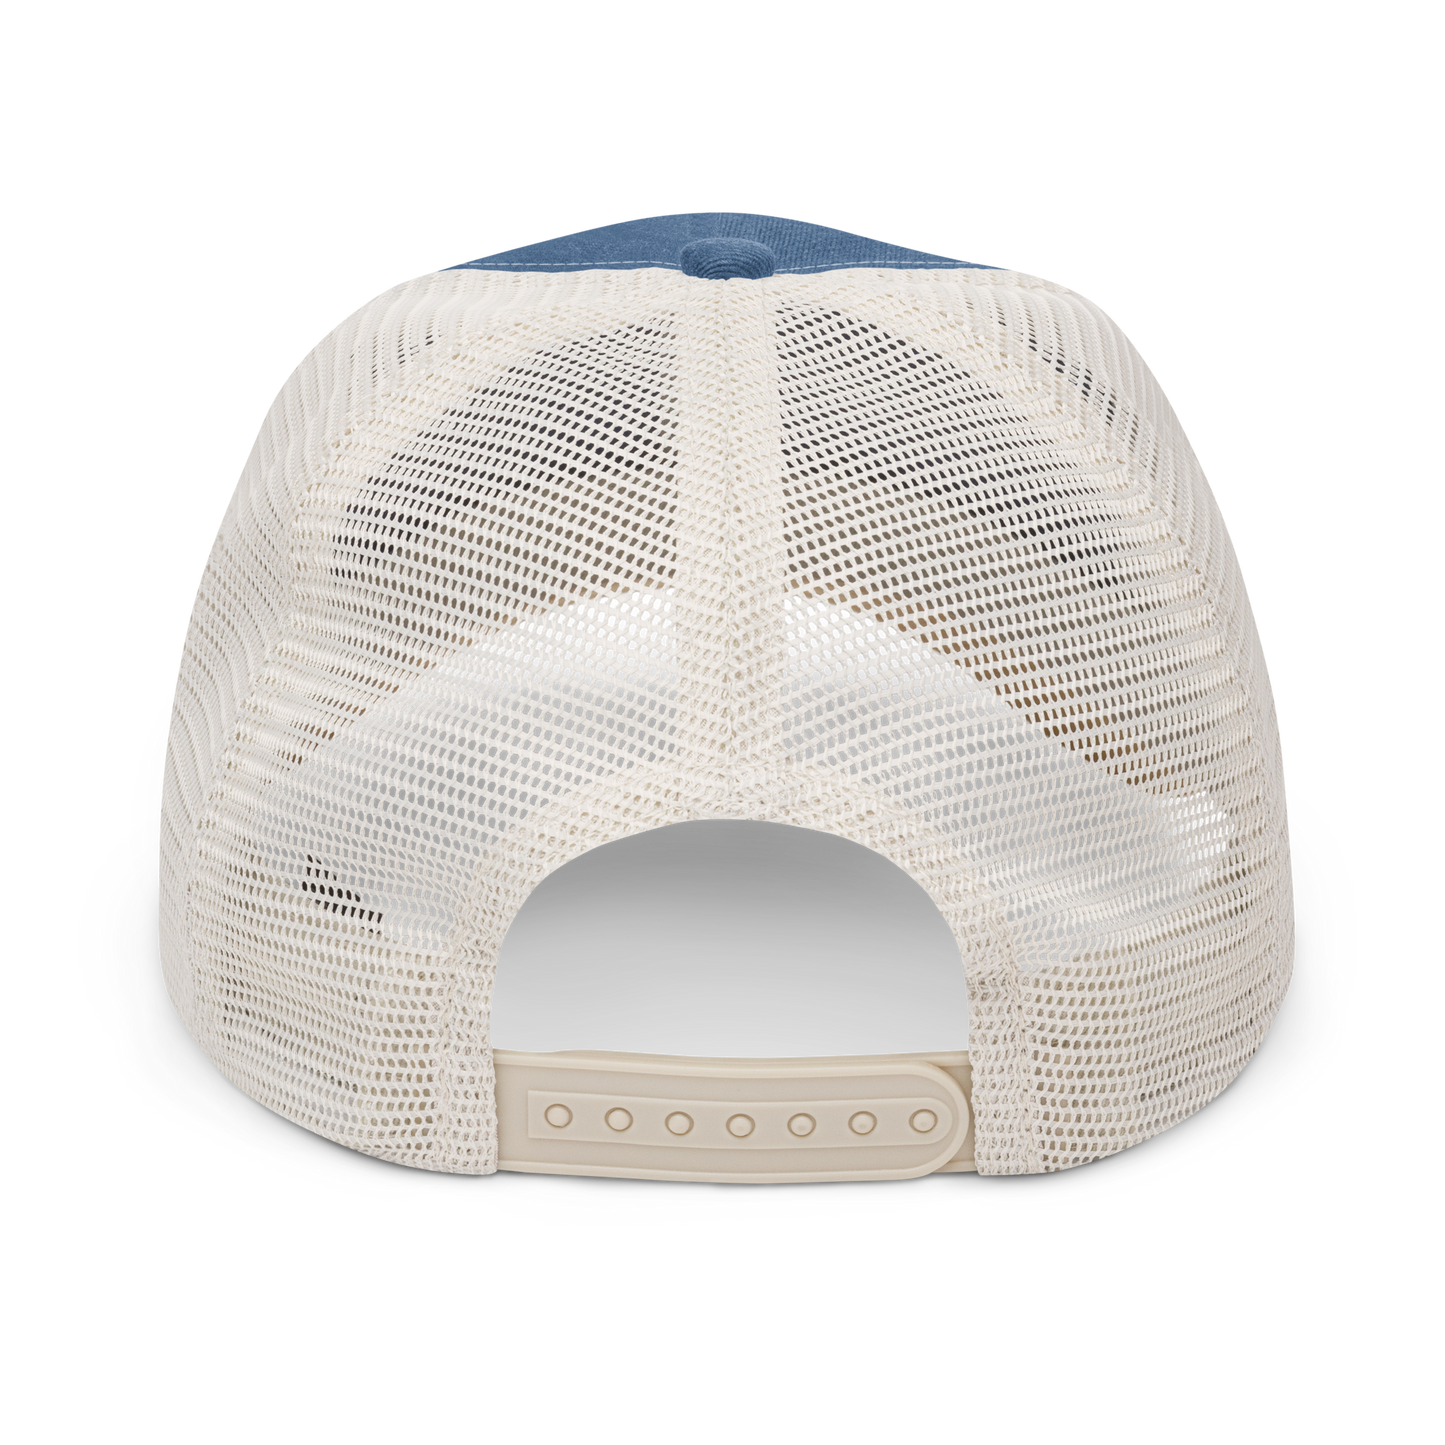 YHM Designs - YUL Montreal Pigment-Dyed Trucker Cap - Crossed-X Design with Airport Code and Vintage Propliner - White Embroidery - Image 19